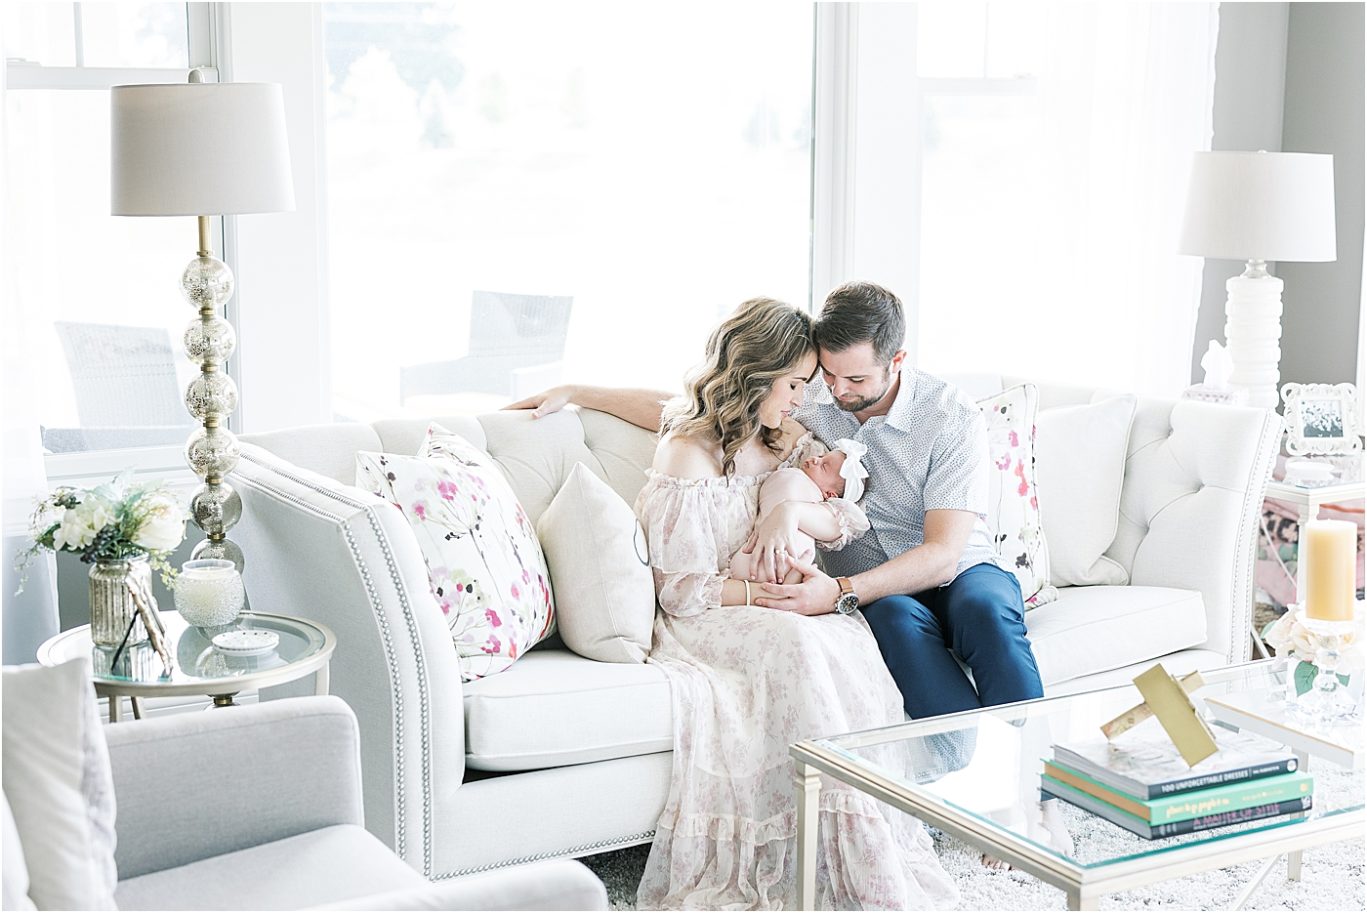 Lifestyle newborn session in Westfield, IN | Lindsay Konopa Photography